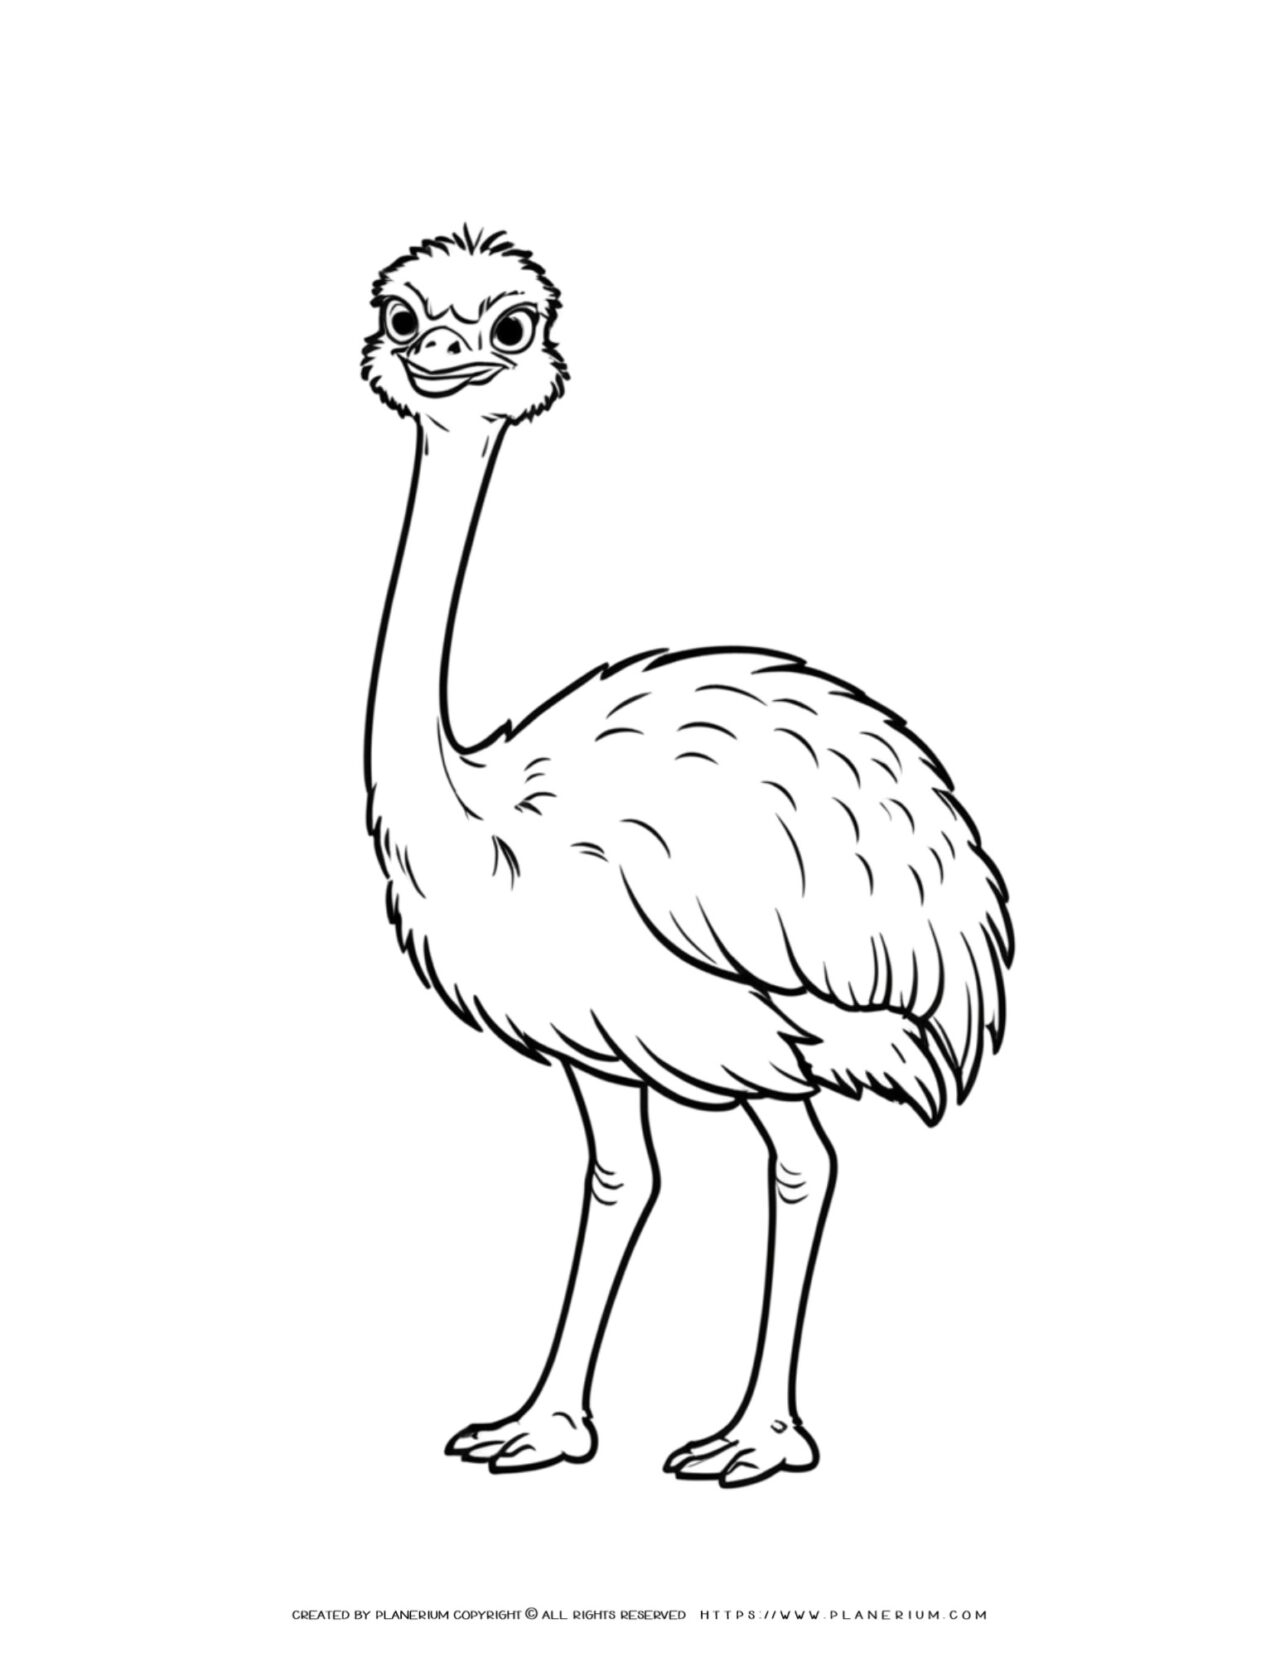 ostrich-illustration-comic-style-coloring-page